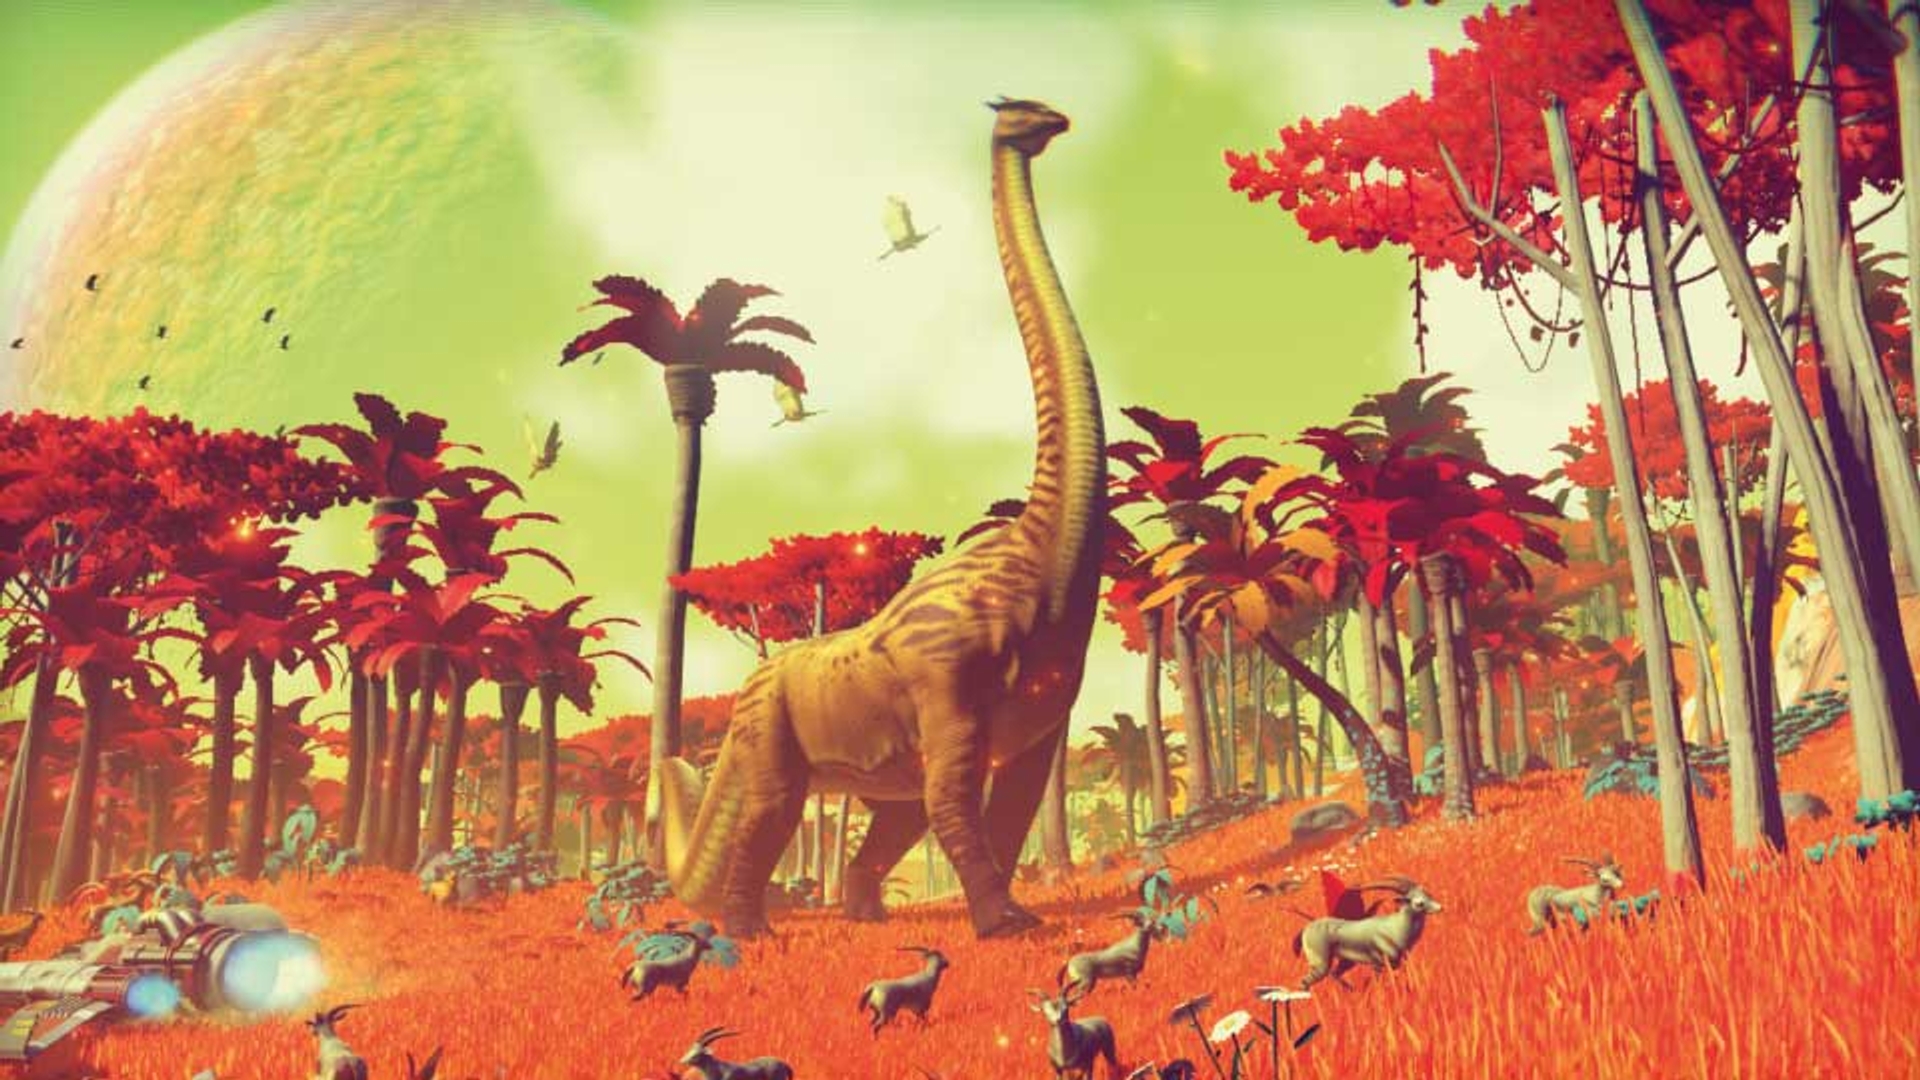 nms3